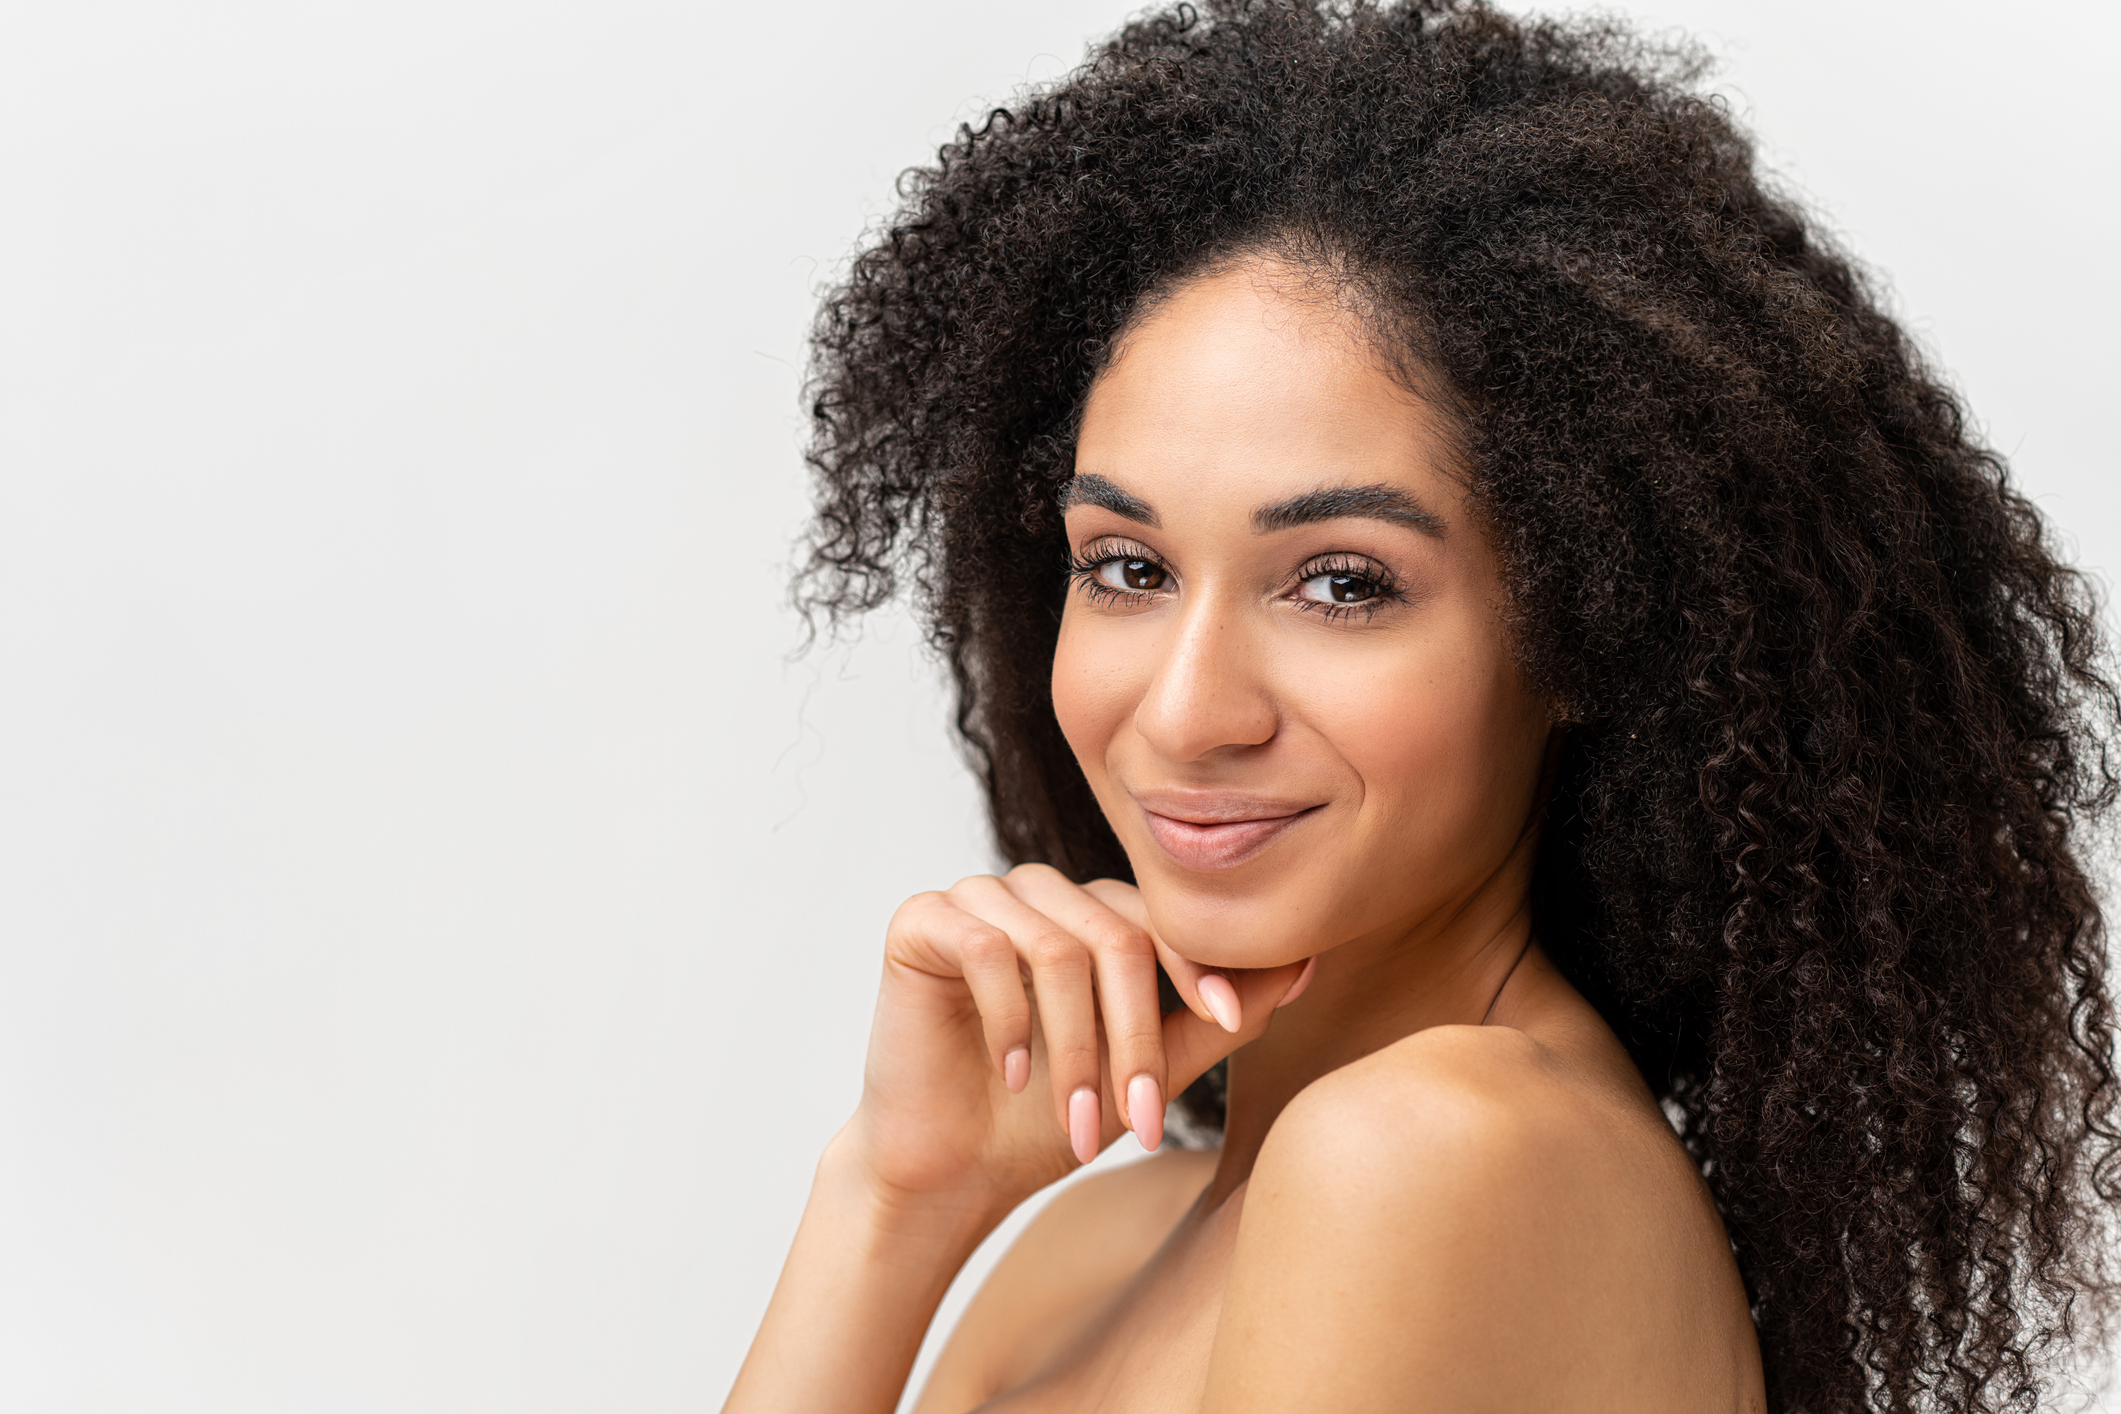 Fascinating attractive multiracial woman look at the camera over white background. Calm serene lady with naked shoulders gently touching face. Skin care concept